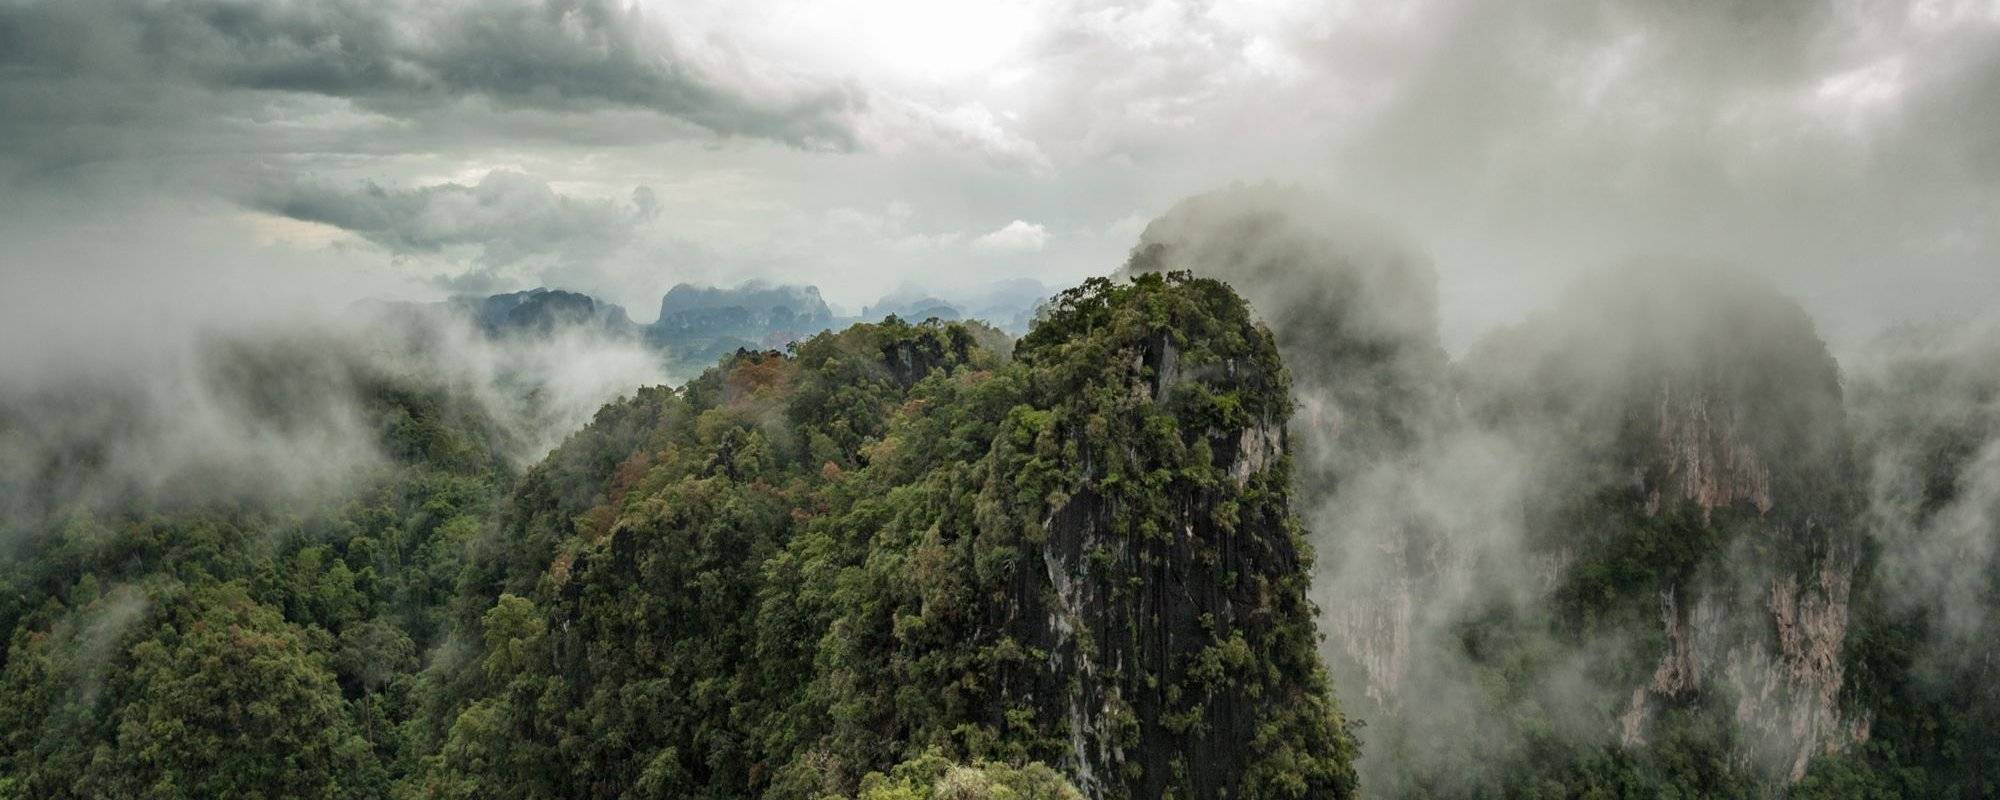 Photo Short #24 - The View From Tiger Cave Mountain In Krabi, Thailand